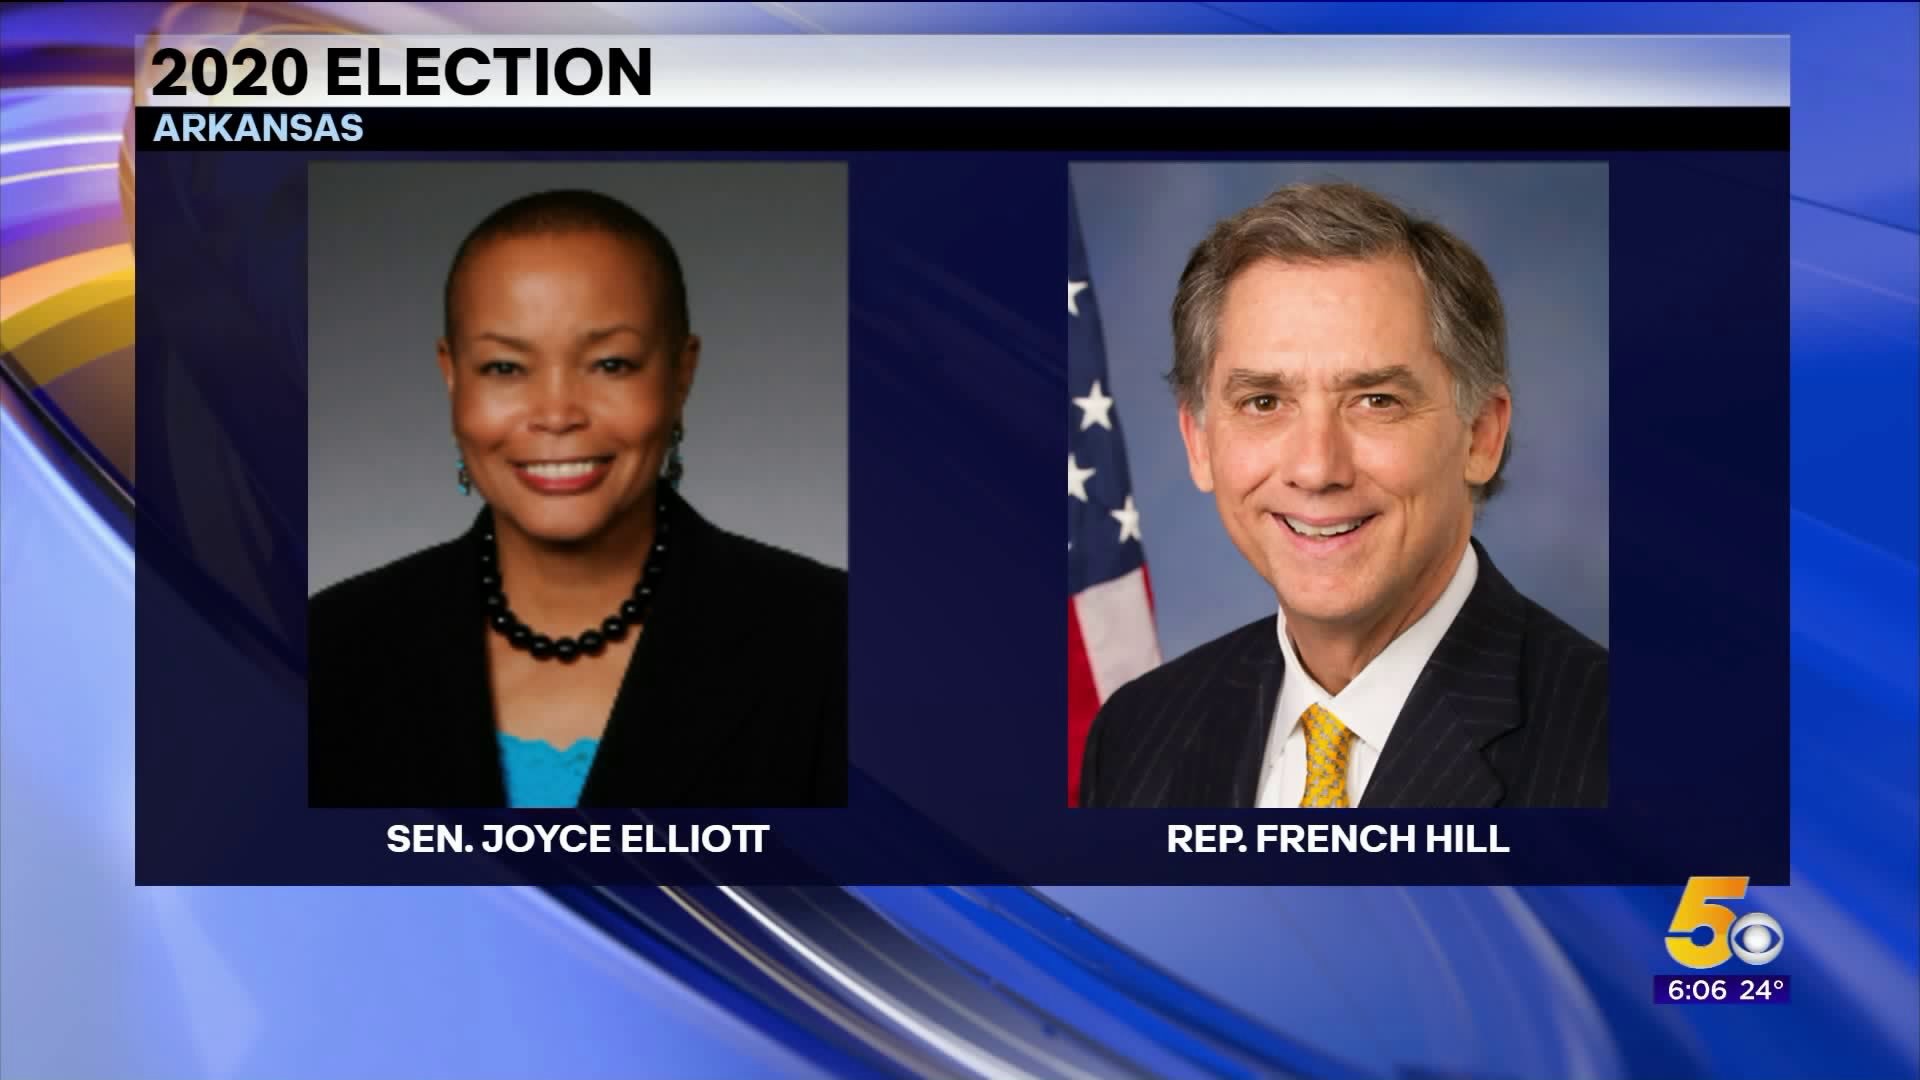 State Sen. Joyce Elliott To Challenge Rep. French Hill In 2020 Election